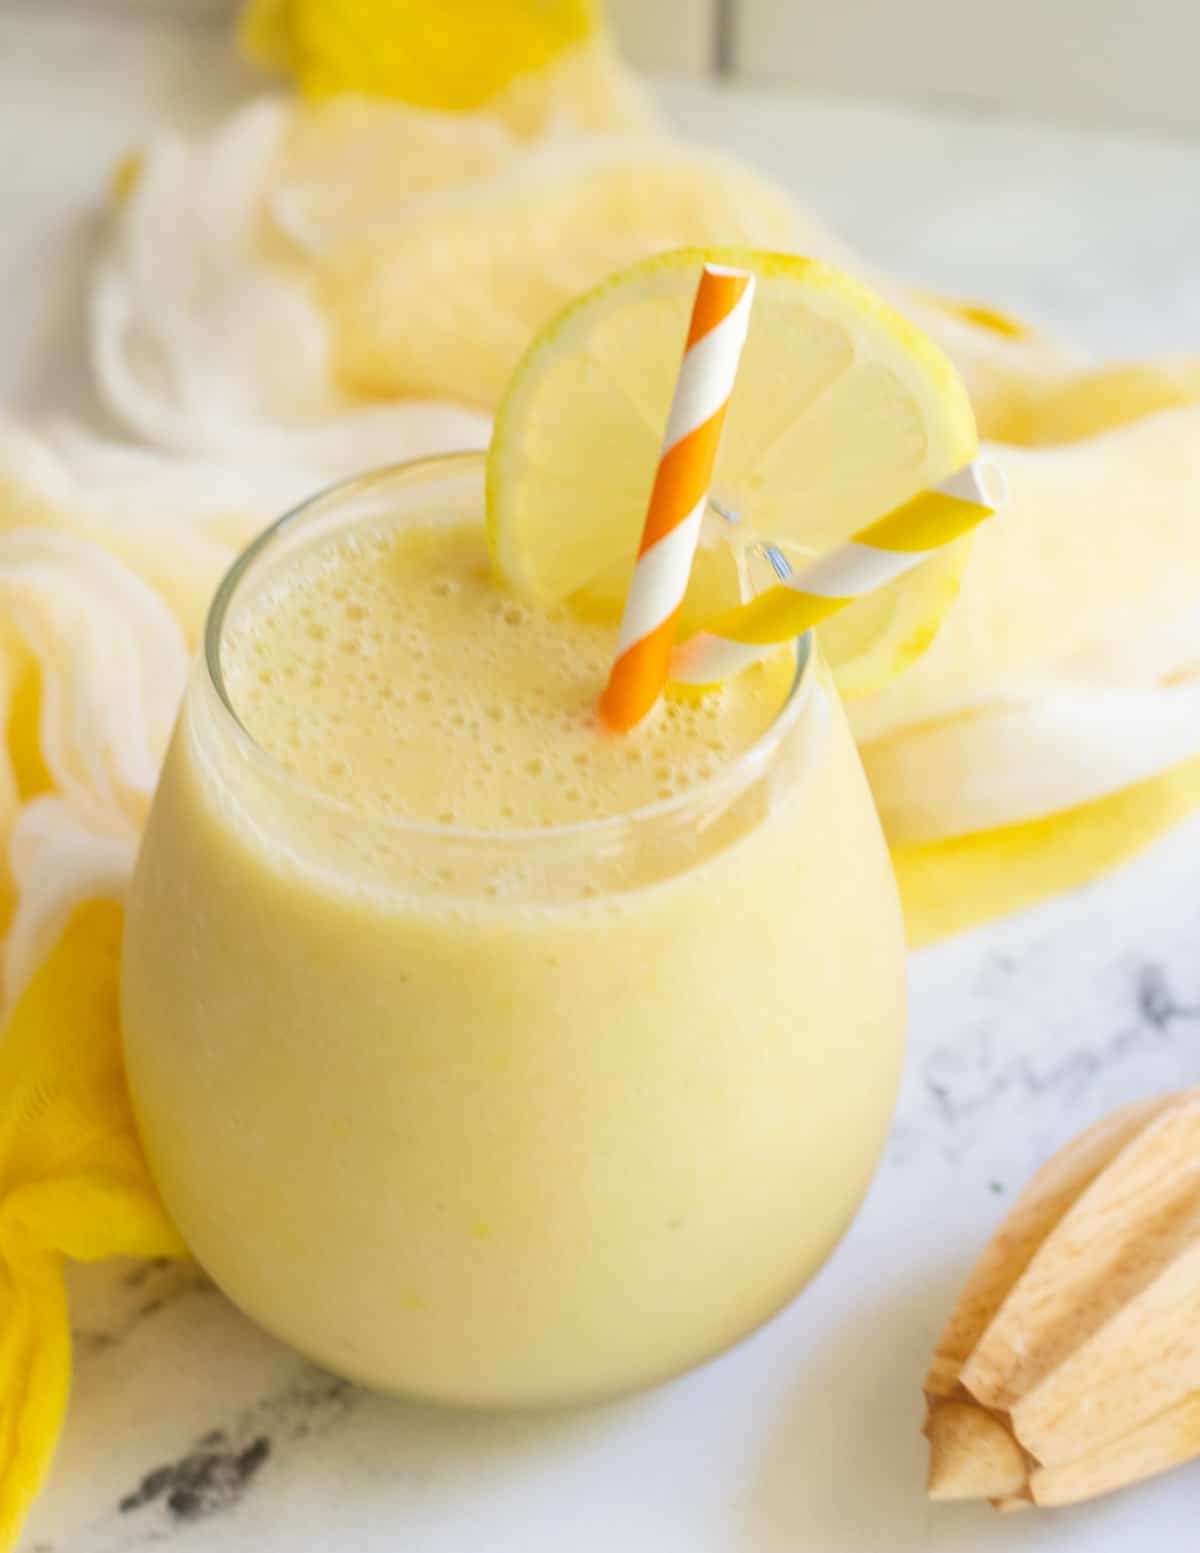 Lemon smoothie in glass.